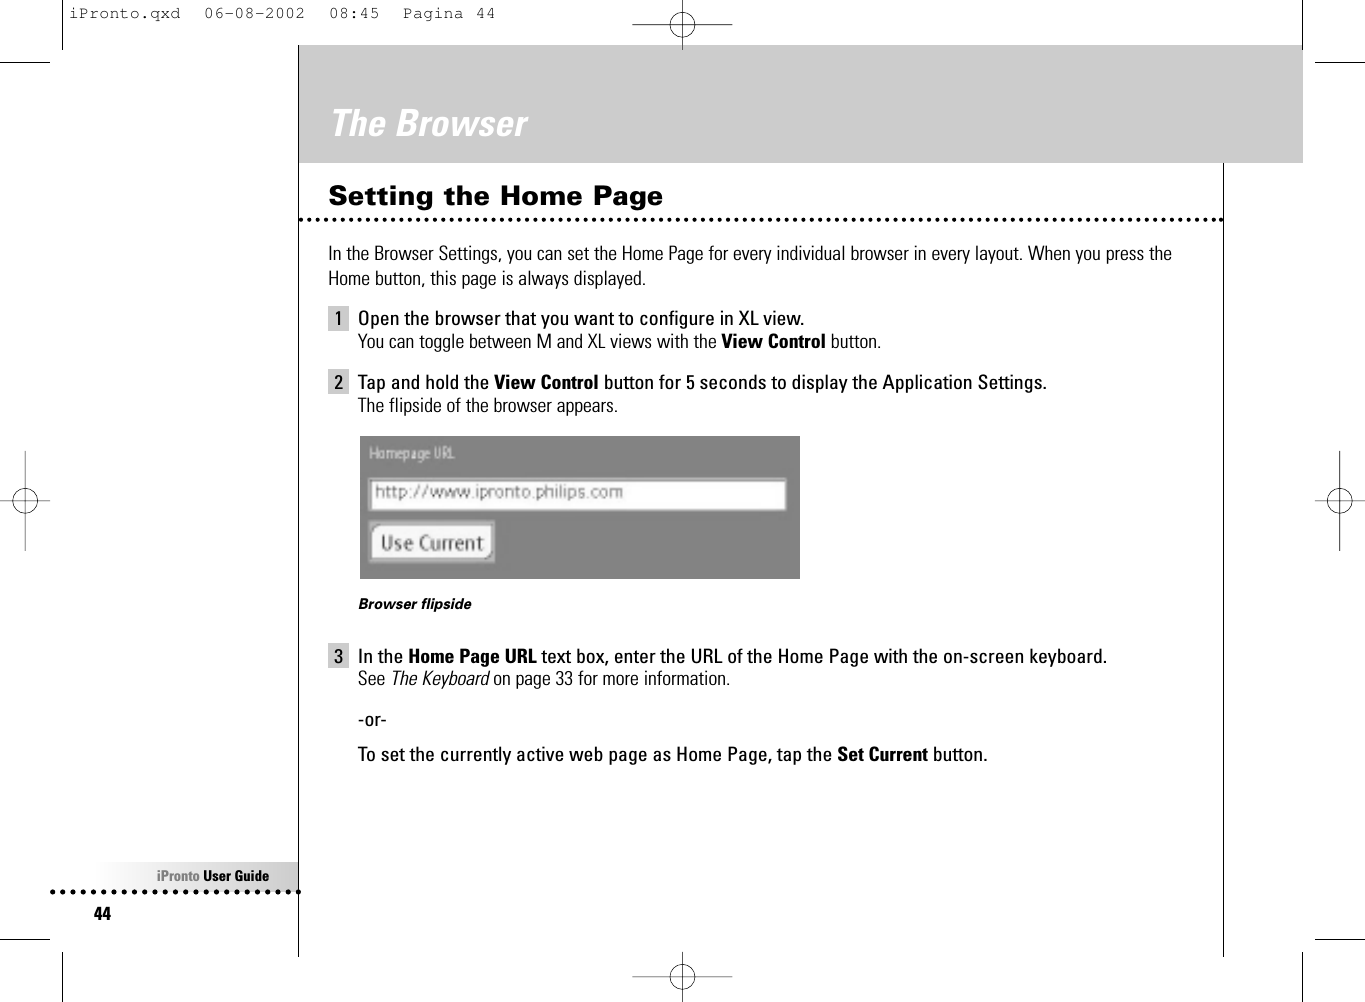 iPronto User Guide44The BrowserSetting the Home PageIn the Browser Settings, you can set the Home Page for every individual browser in every layout. When you press theHome button, this page is always displayed.1 Open the browser that you want to configure in XL view.You can toggle between M and XL views with the View Control button.2 Tap and hold the View Control button for 5 seconds to display the Application Settings.The flipside of the browser appears.Browser flipside3 In the Home Page URL text box, enter the URL of the Home Page with the on-screen keyboard.See The Keyboard on page 33 for more information.-or-To set the currently active web page as Home Page, tap the Set Current button.iPronto.qxd  06-08-2002  08:45  Pagina 44